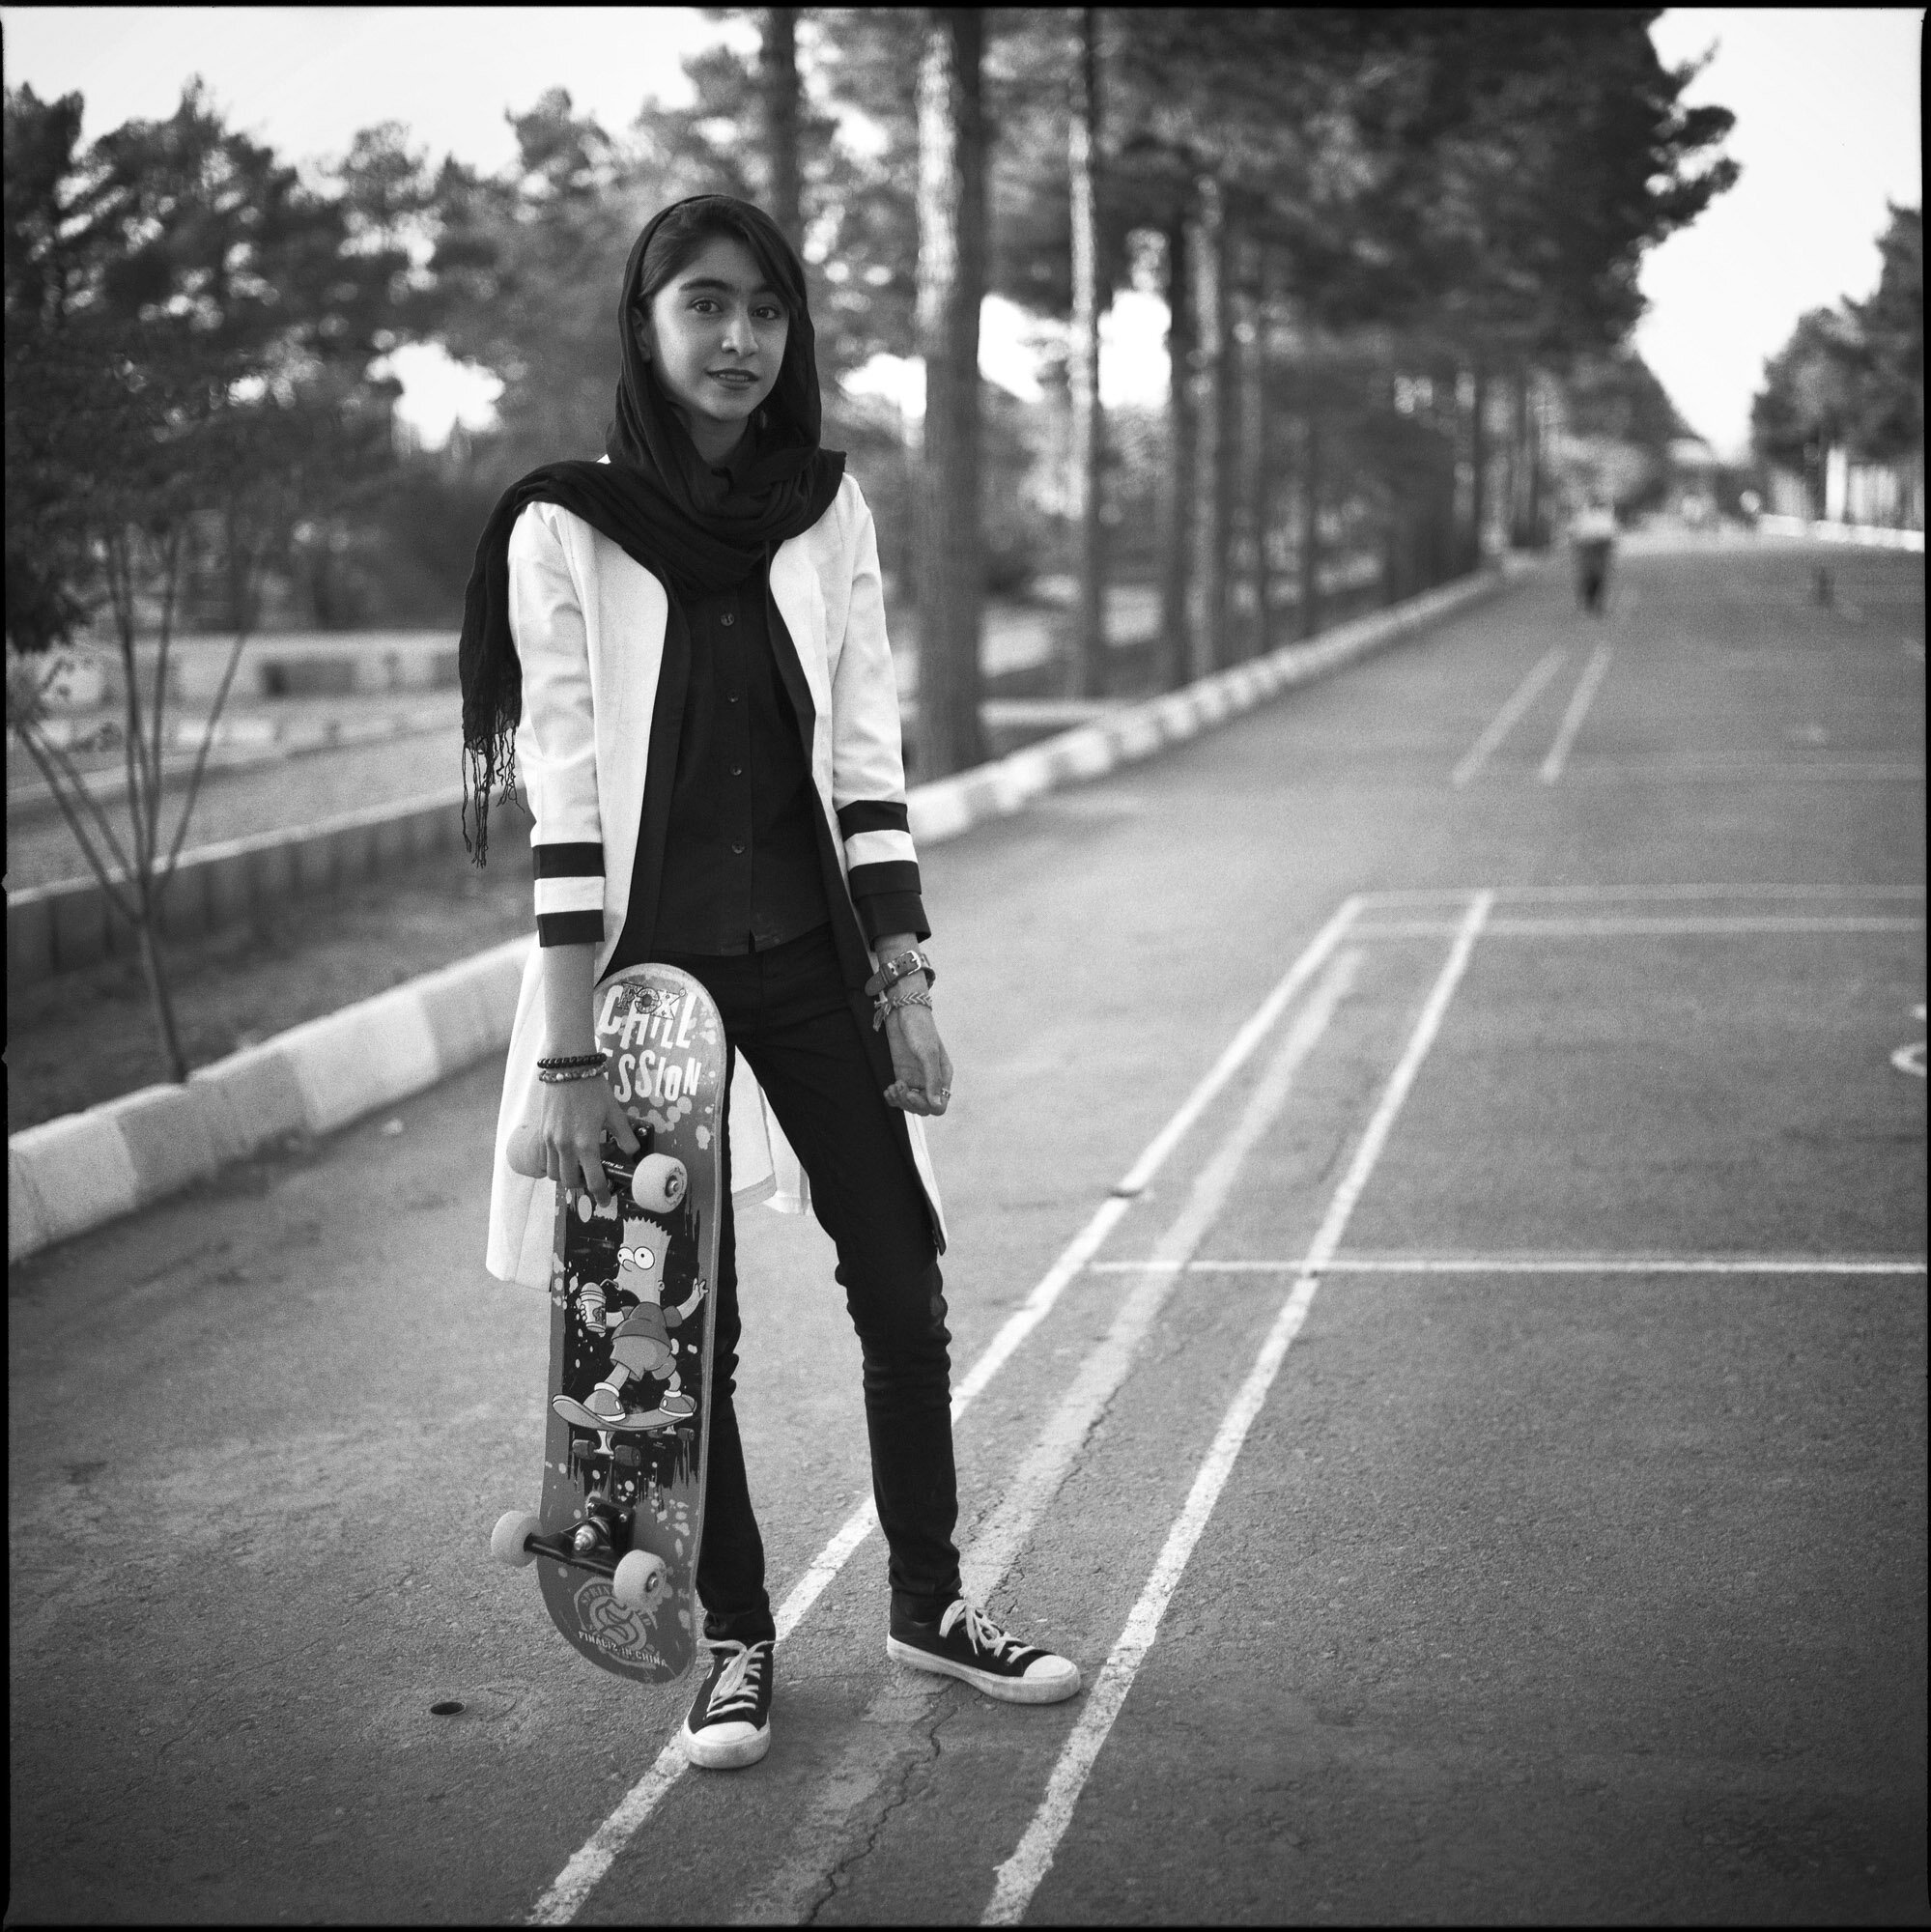  Kimia, 16 years old, skater girl from Kerman, in a public park where she used to practice. Kerman, Iran, October 3, 2015. 